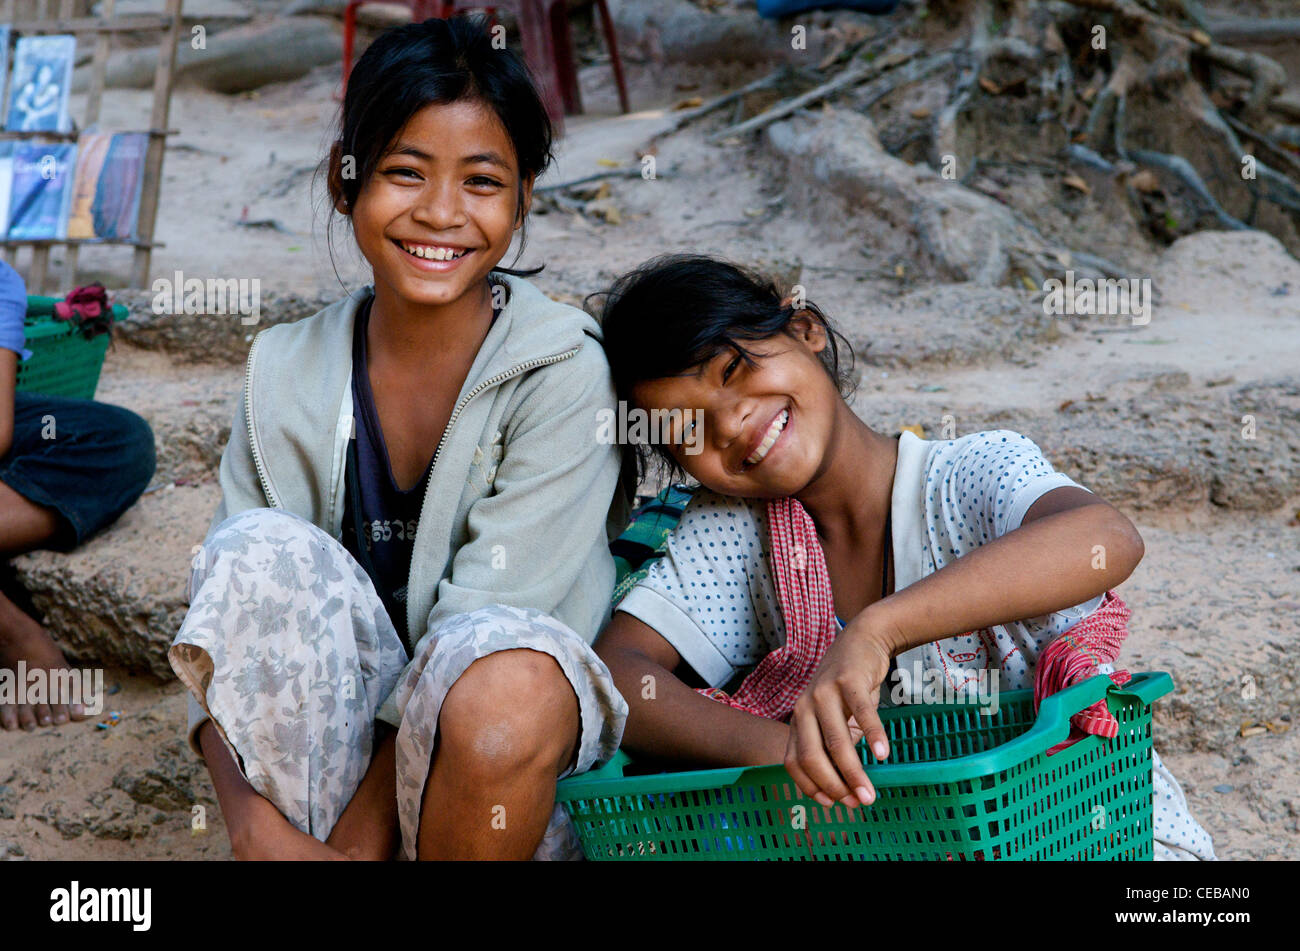 Young, happy Khmer girl vendors (1 girl wears a Krama / traditional Cambodian scarf), Preah Khan, Temples of Angkor, Cambodia. credit: Kraig Lieb Stock Photo